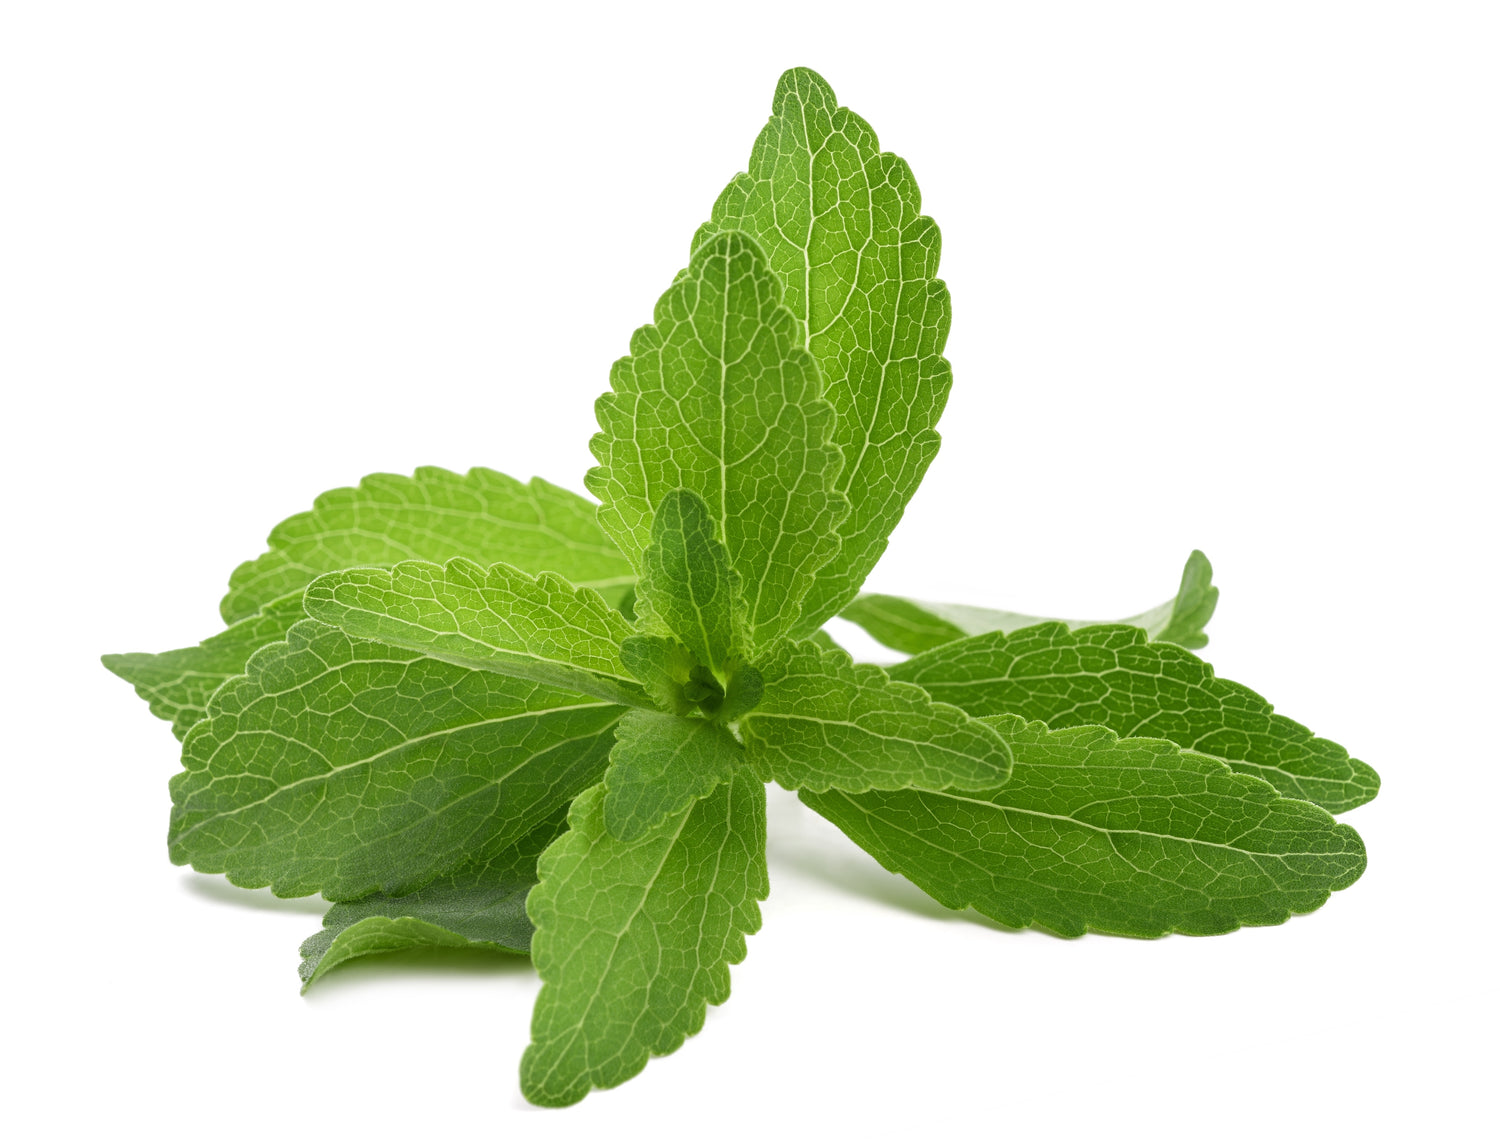 Stevia leaf. These leaves are boiled in filtered water to extract the natural sweetening agent called Steviol glycocides. This product is one of the purest available at &gt;95%.